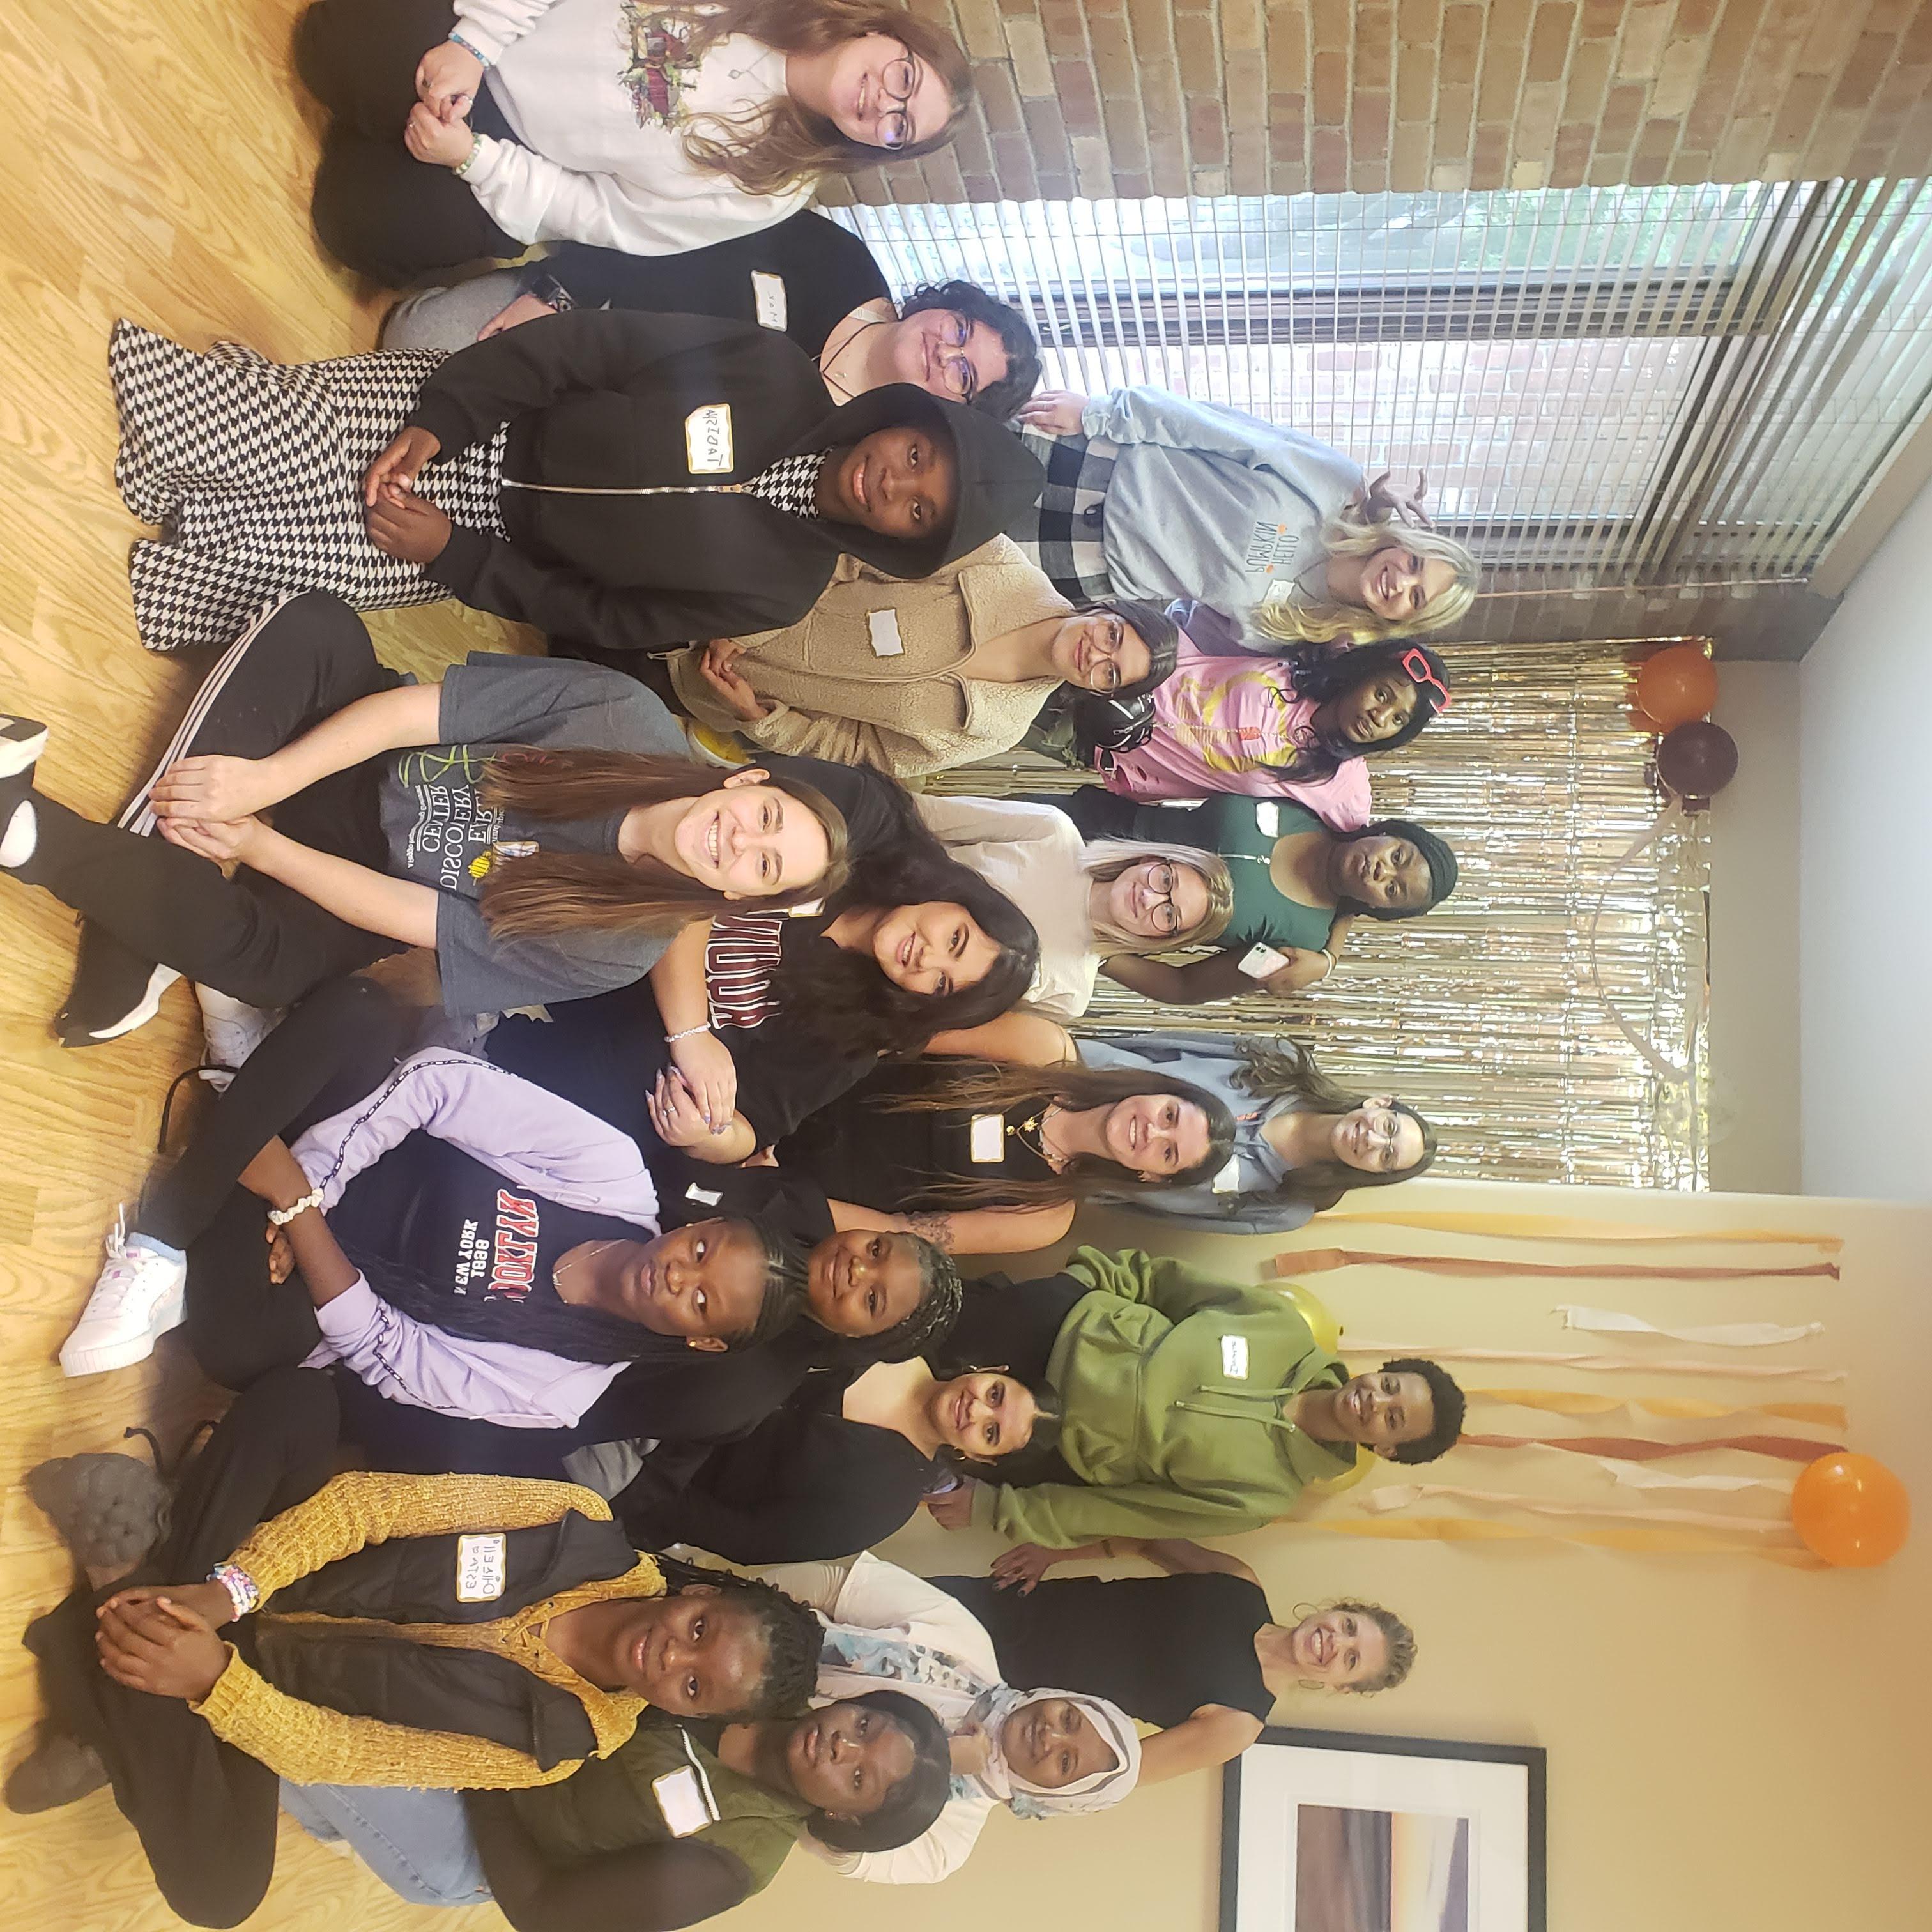 Students and refugee teens pose together at fall celebration